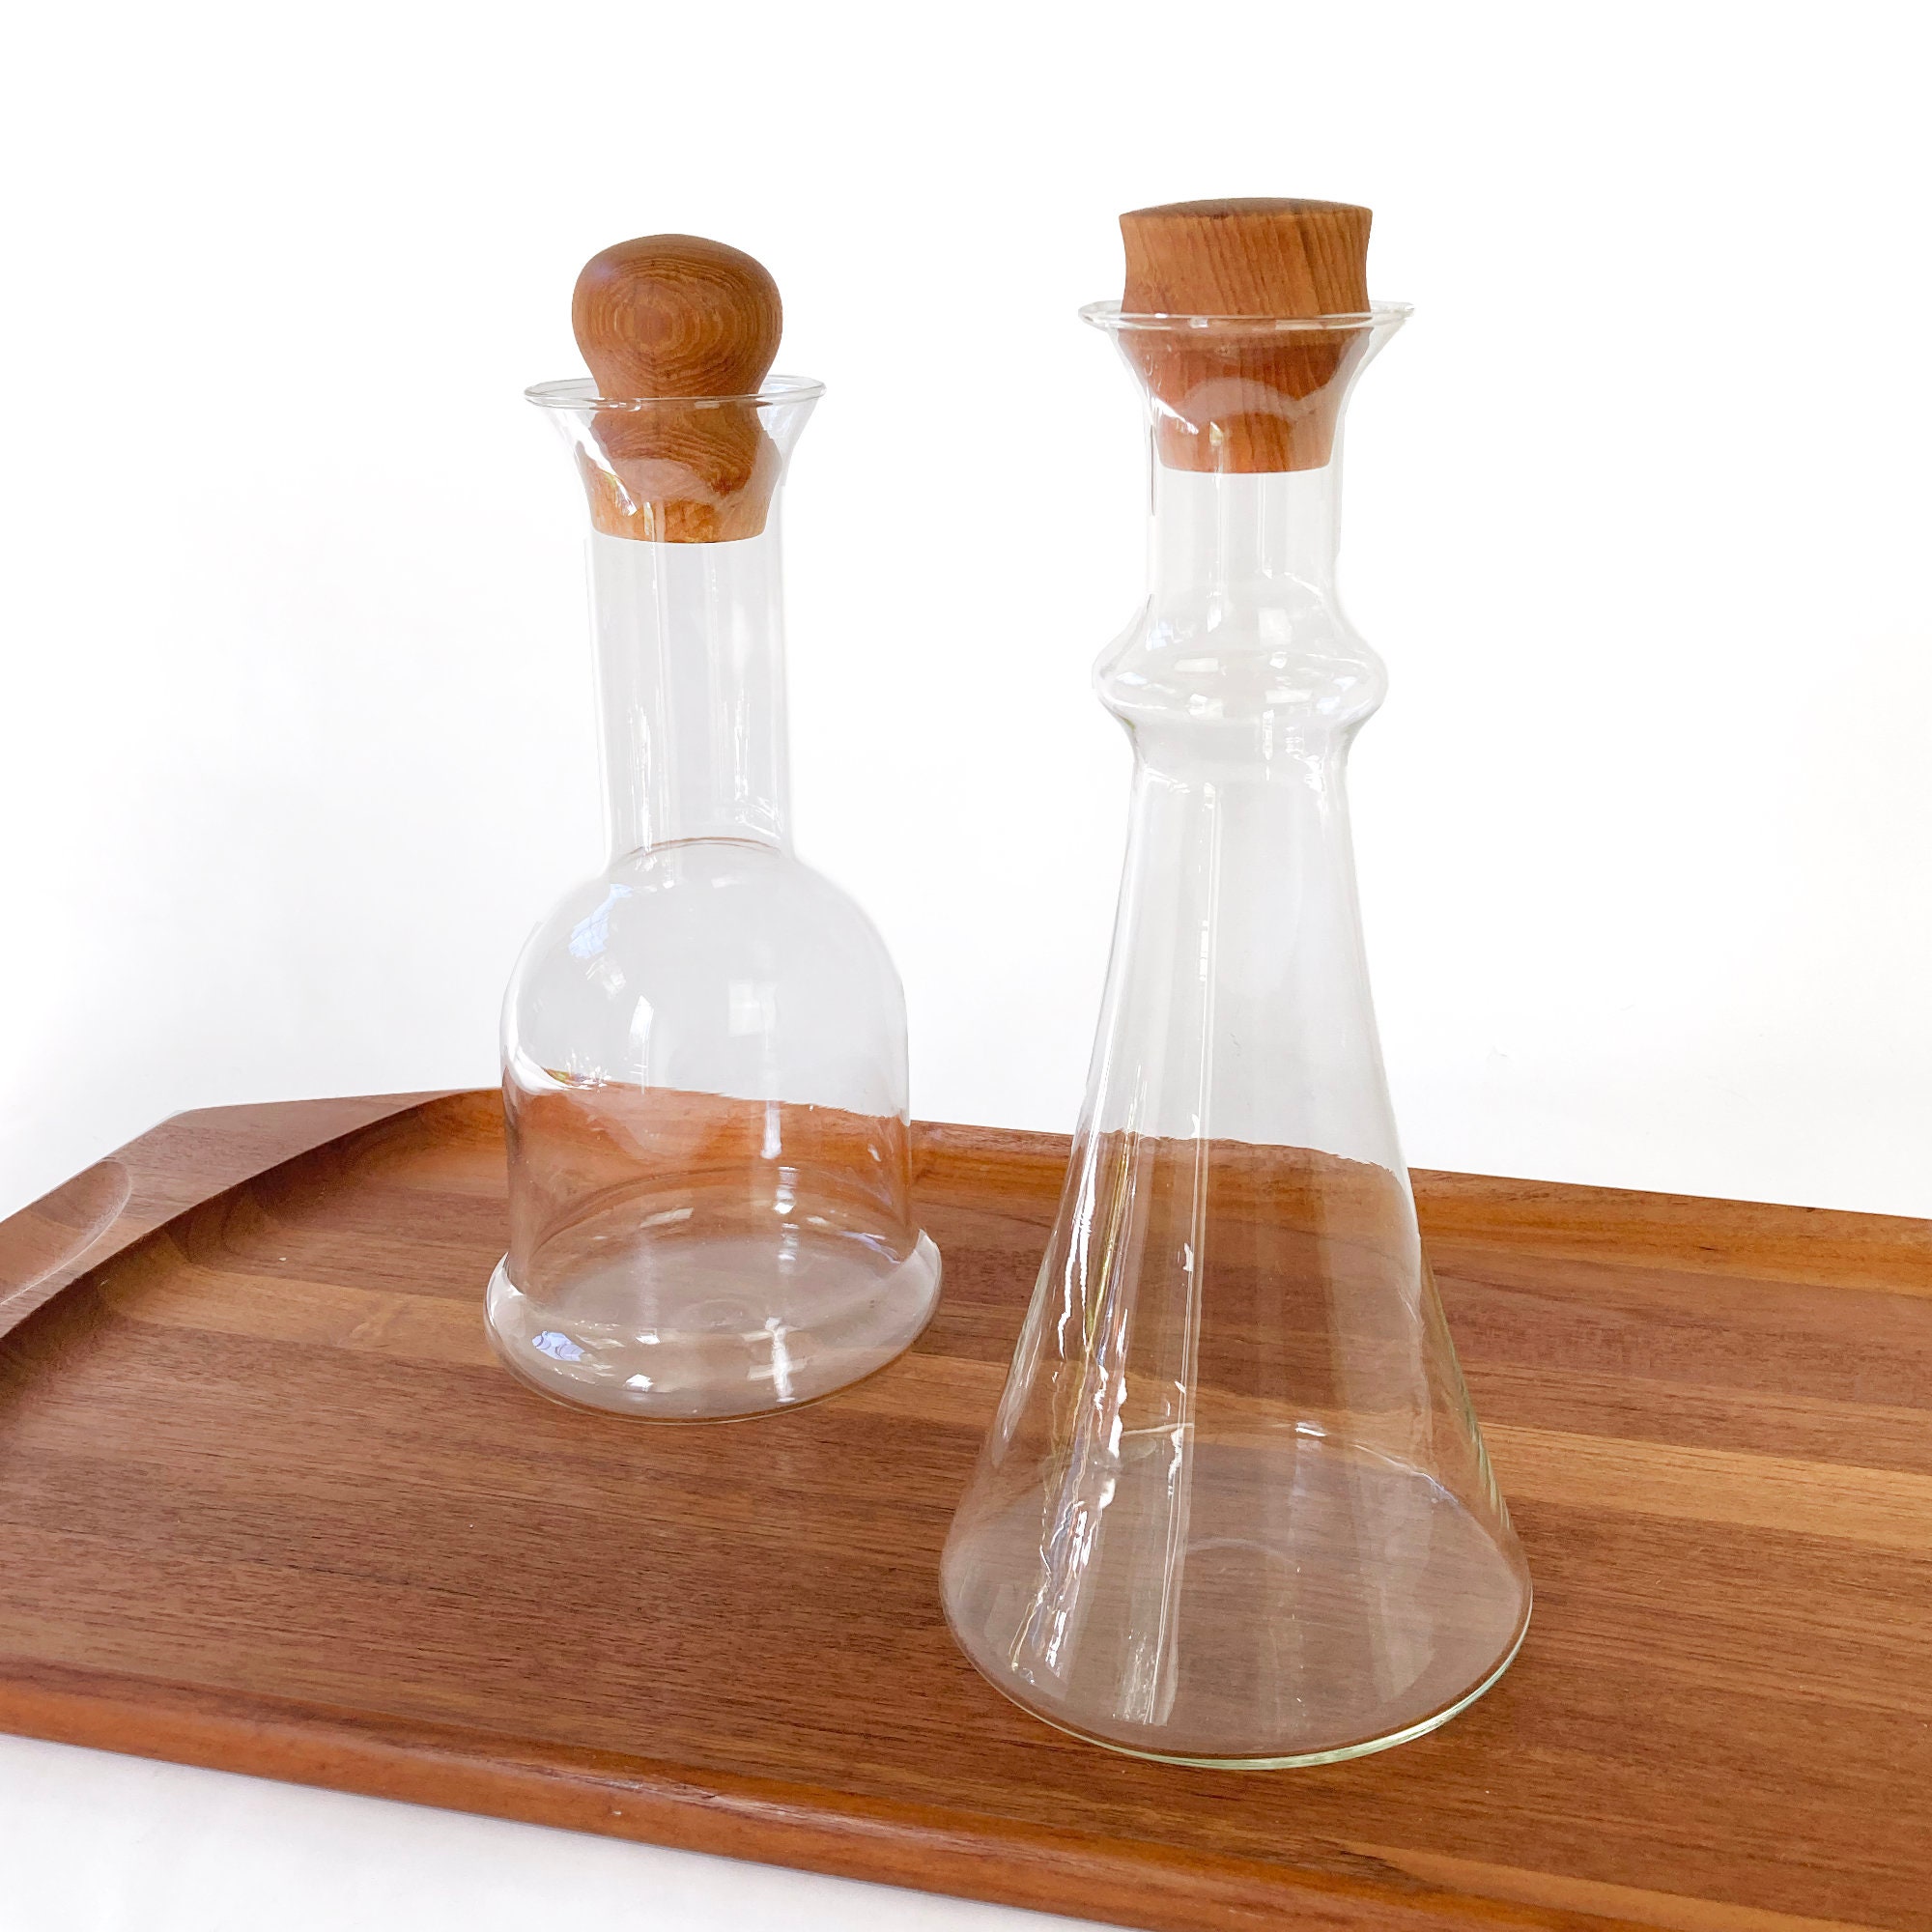 Veans Tableware Single Serving Glass Wine Carafe 6.5 oz - Mini Decanters - Small Individual Carafes, Set of 4 - w/Coasters